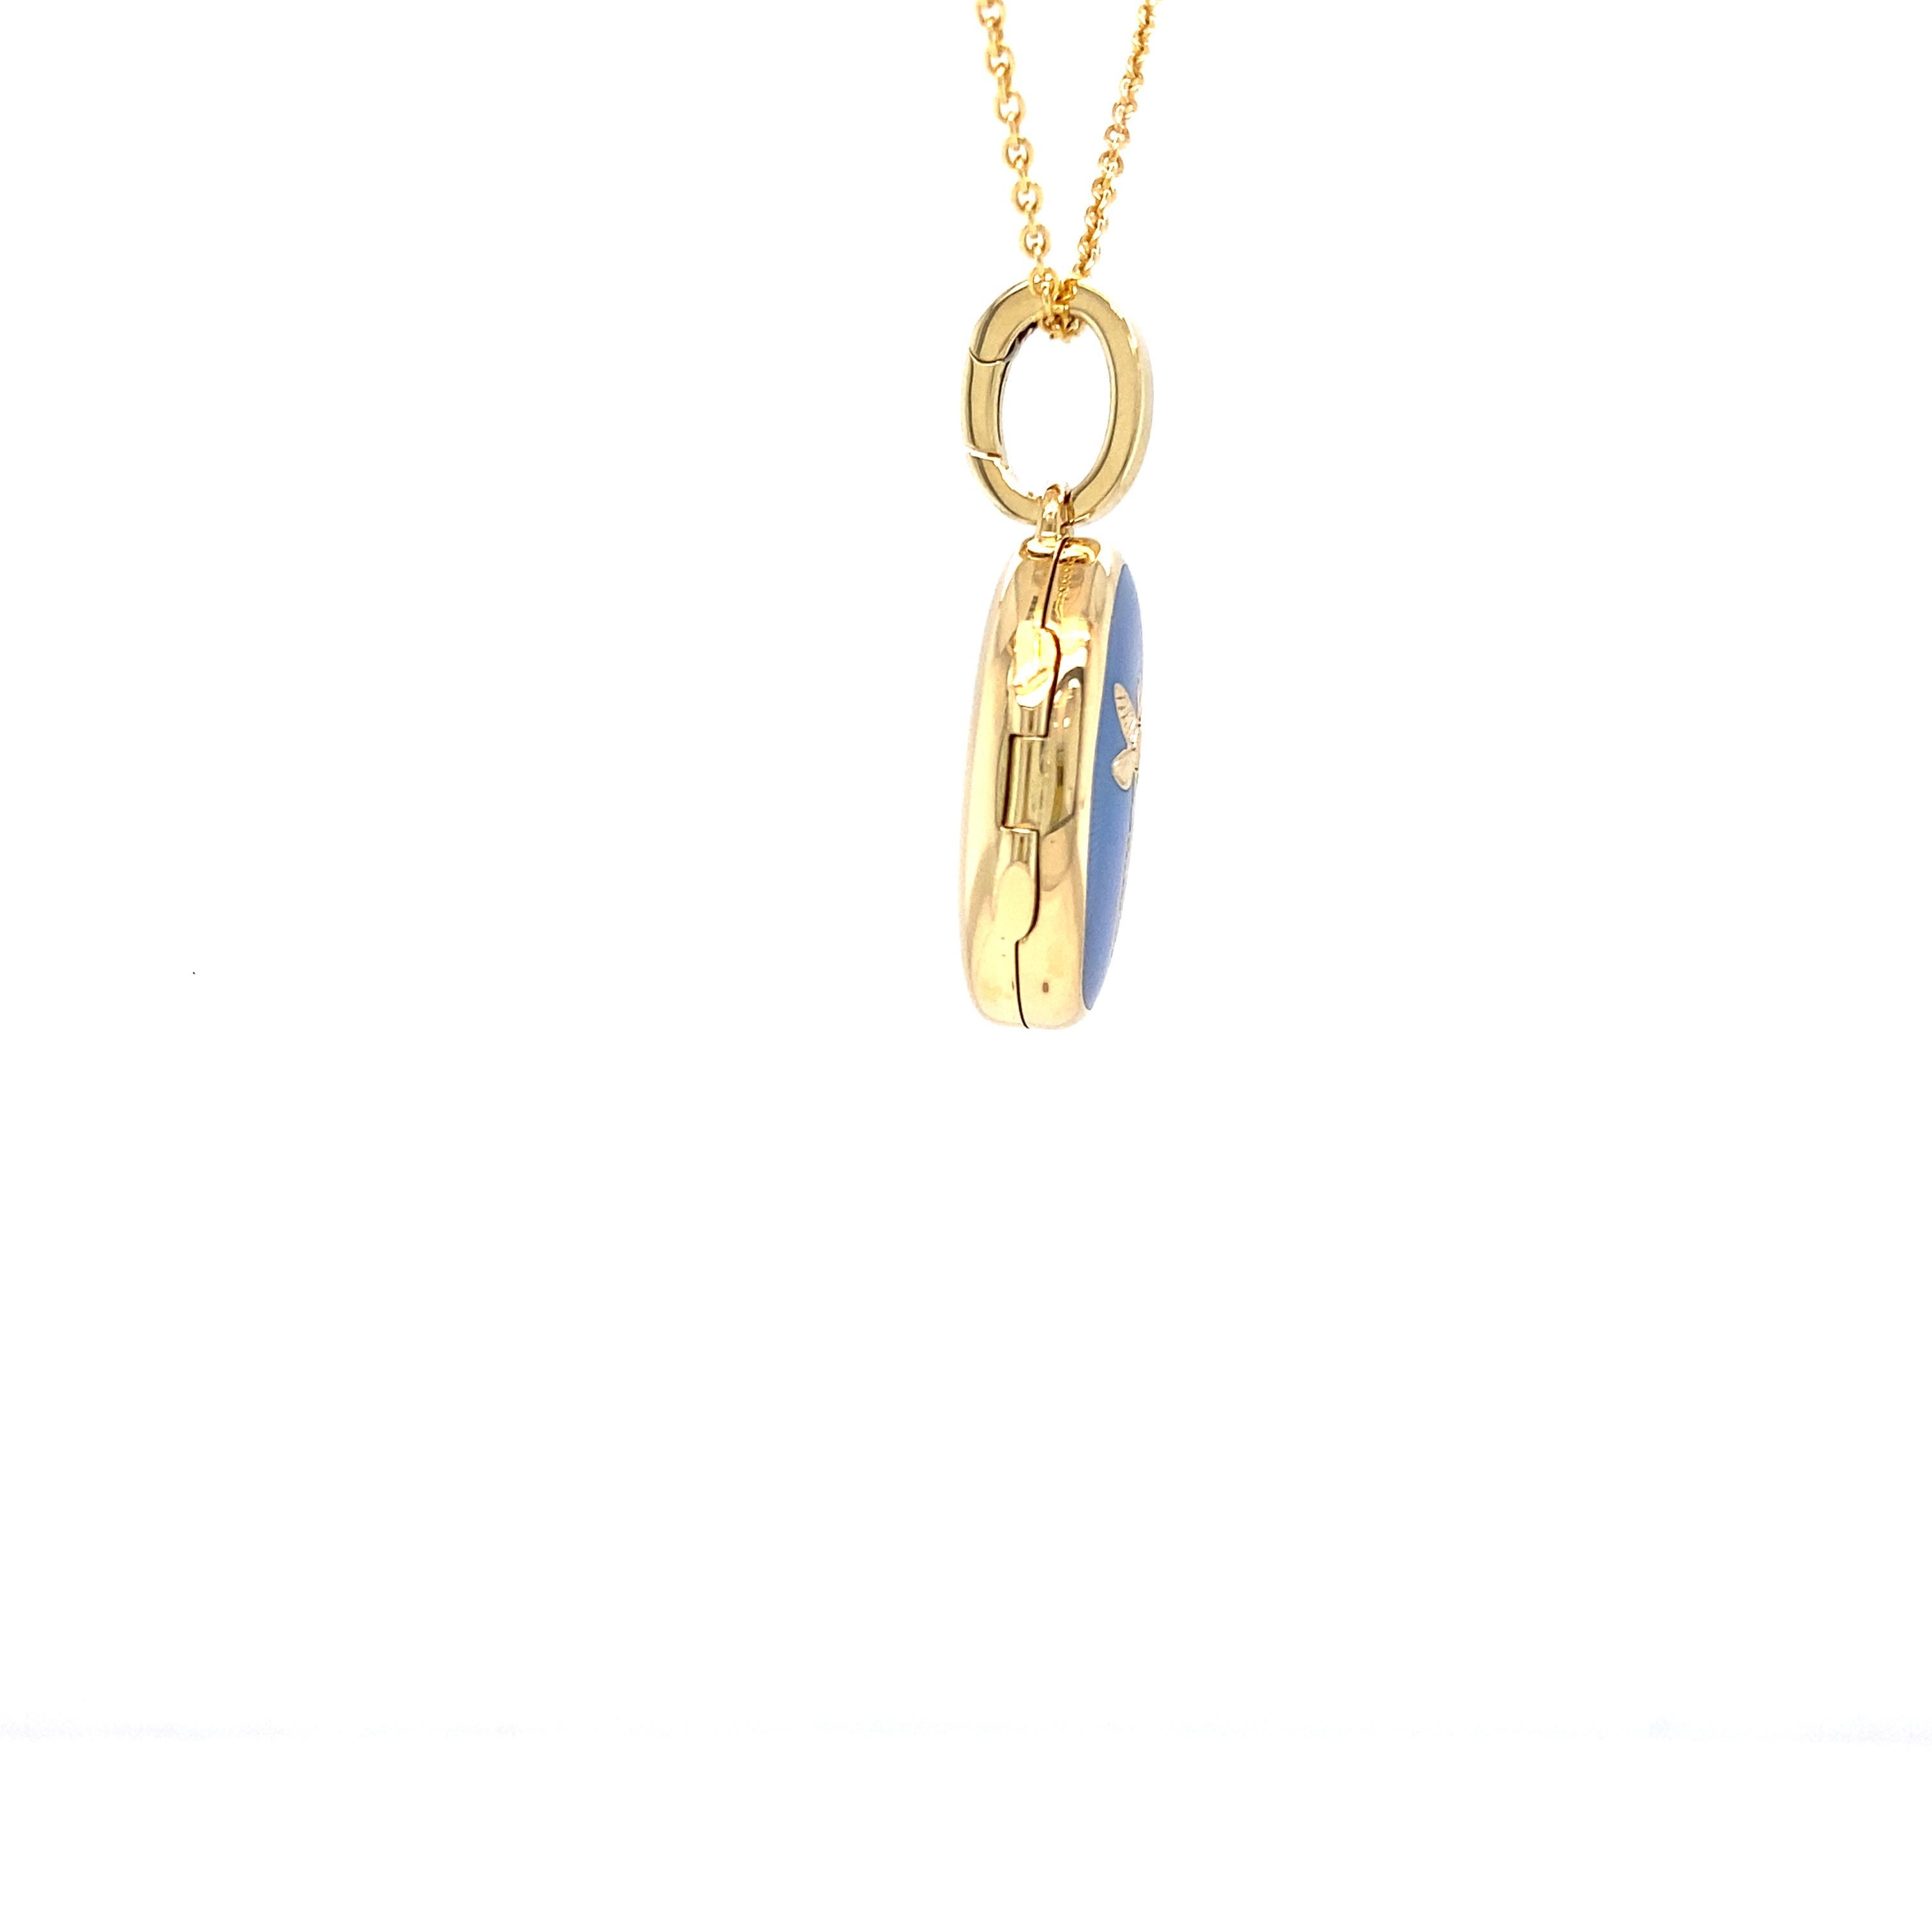 Oval Locket Pendant Necklace Dragonfly 18k Yellow Gold - Opalescent Blue Enamel For Sale 1